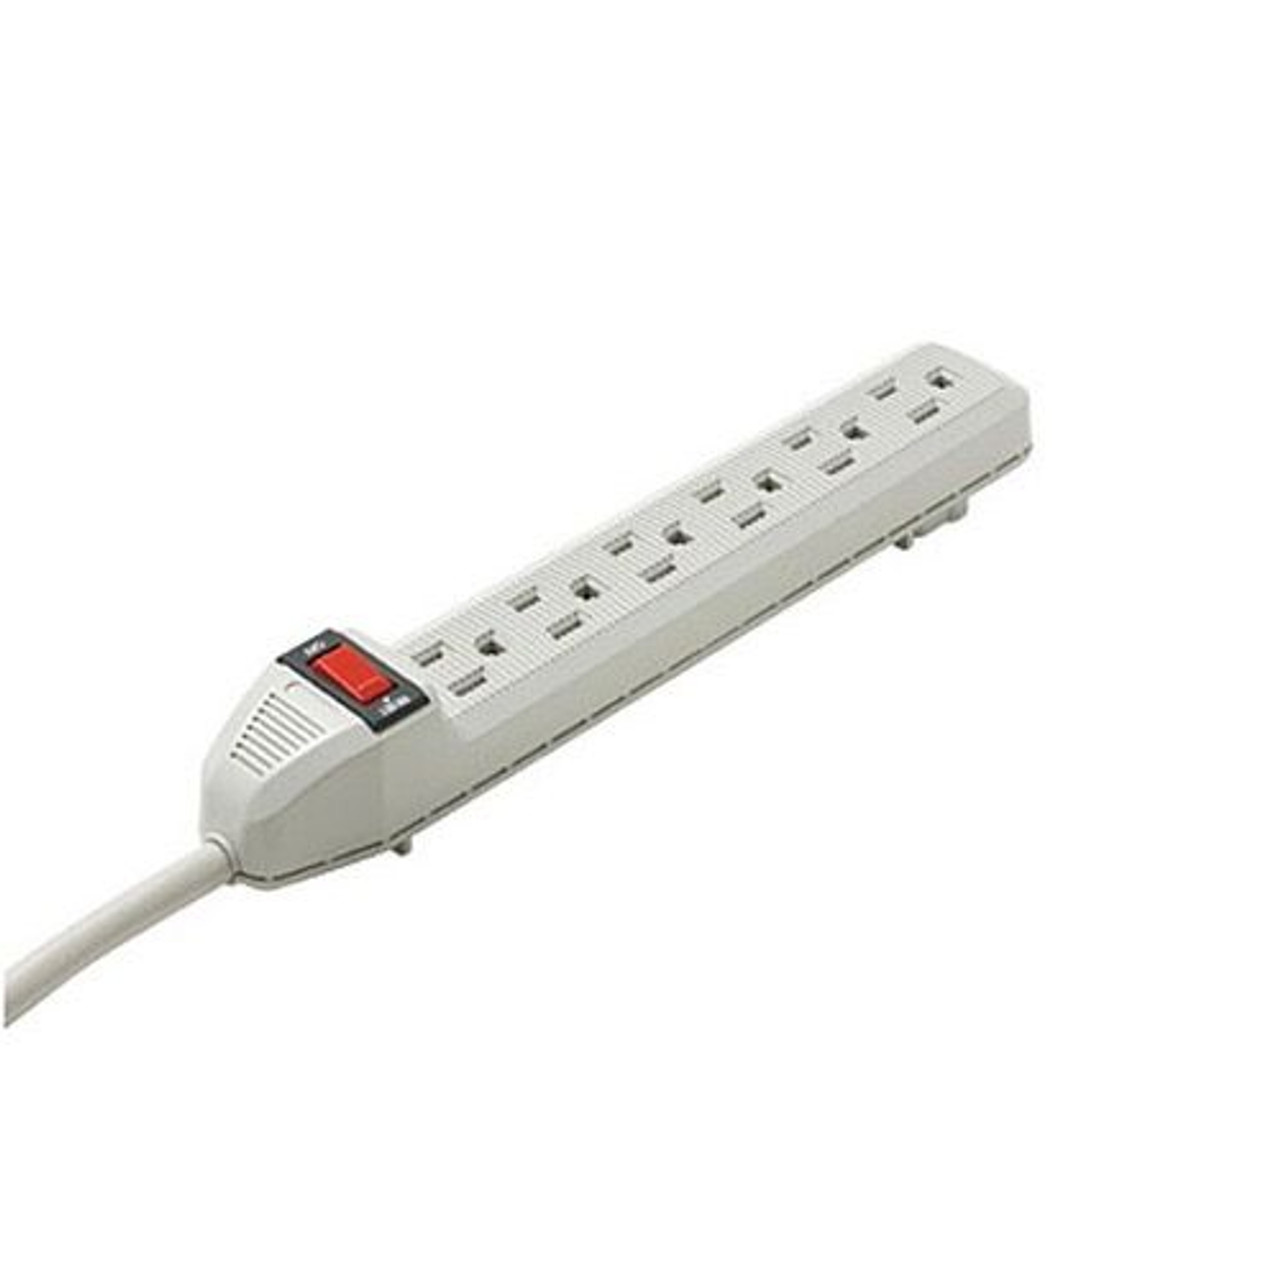 Steren 905-109 Surge Strip Protector 6 Outlet UL Listed 3' FT Cord 90 Joules Protector Safety Circuit Breaker with High-Impact ABS Plastic Housing and 14 AWG 3' FT Cord, On/Off Power Switch, Part # 905109